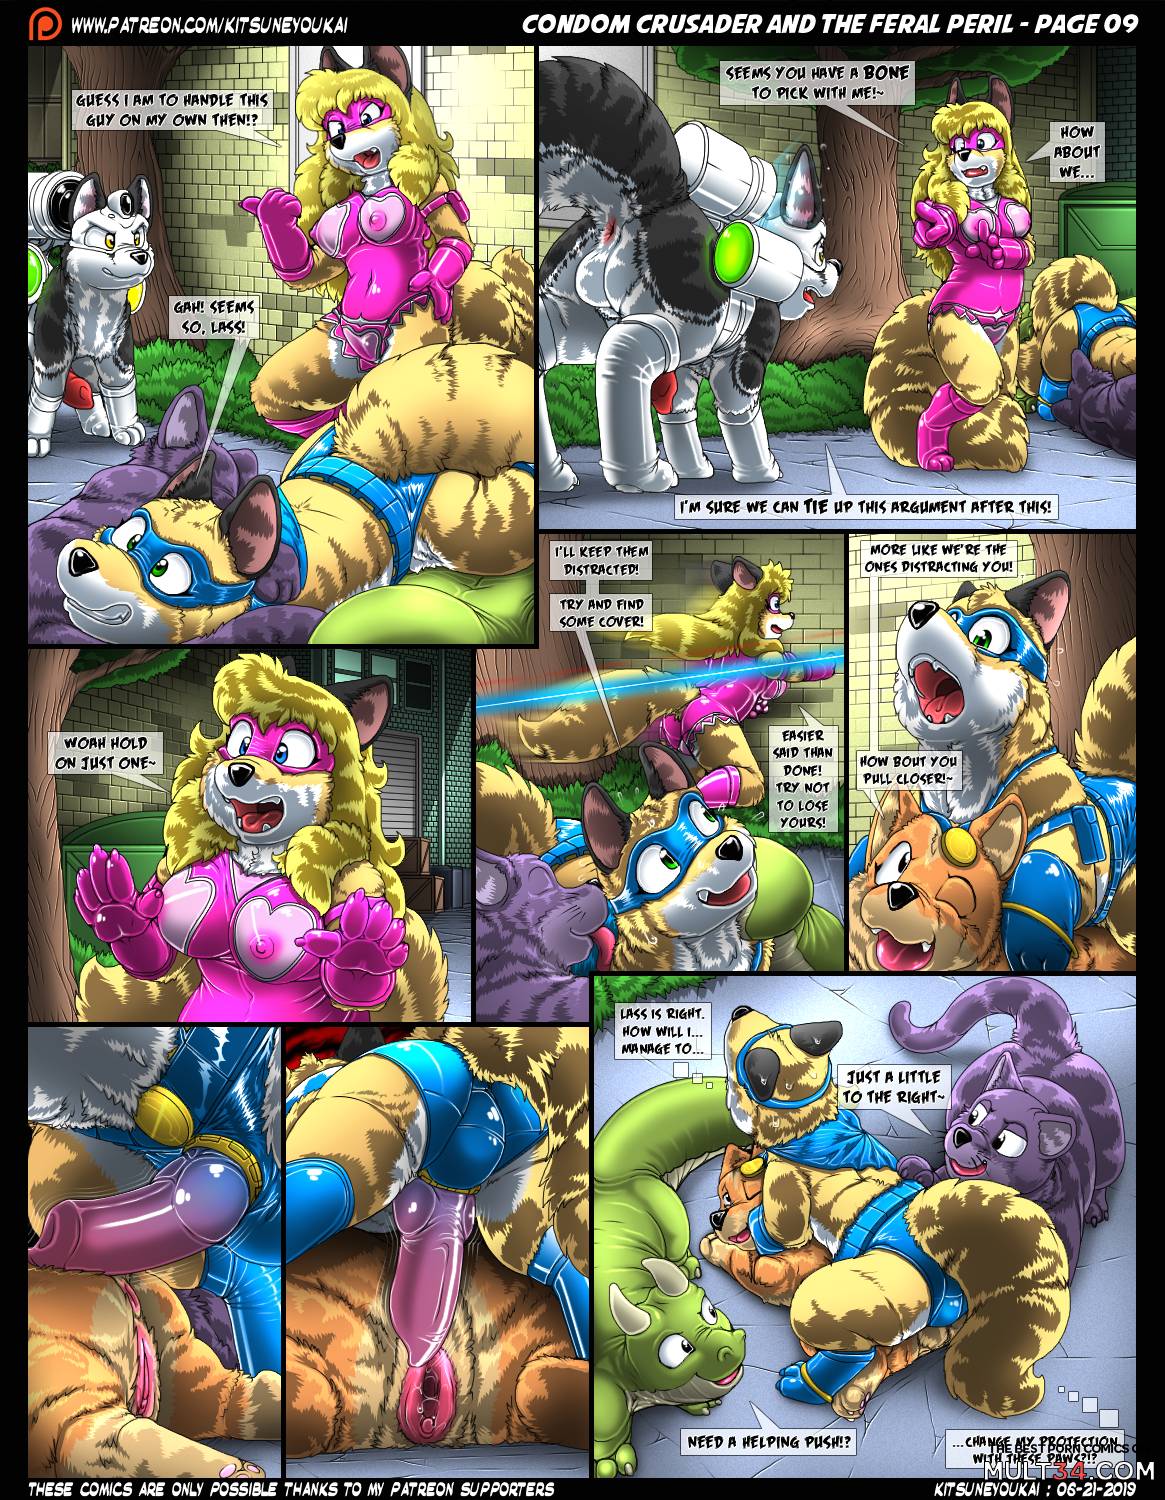 Condom Crusader and the Feral Peril page 9